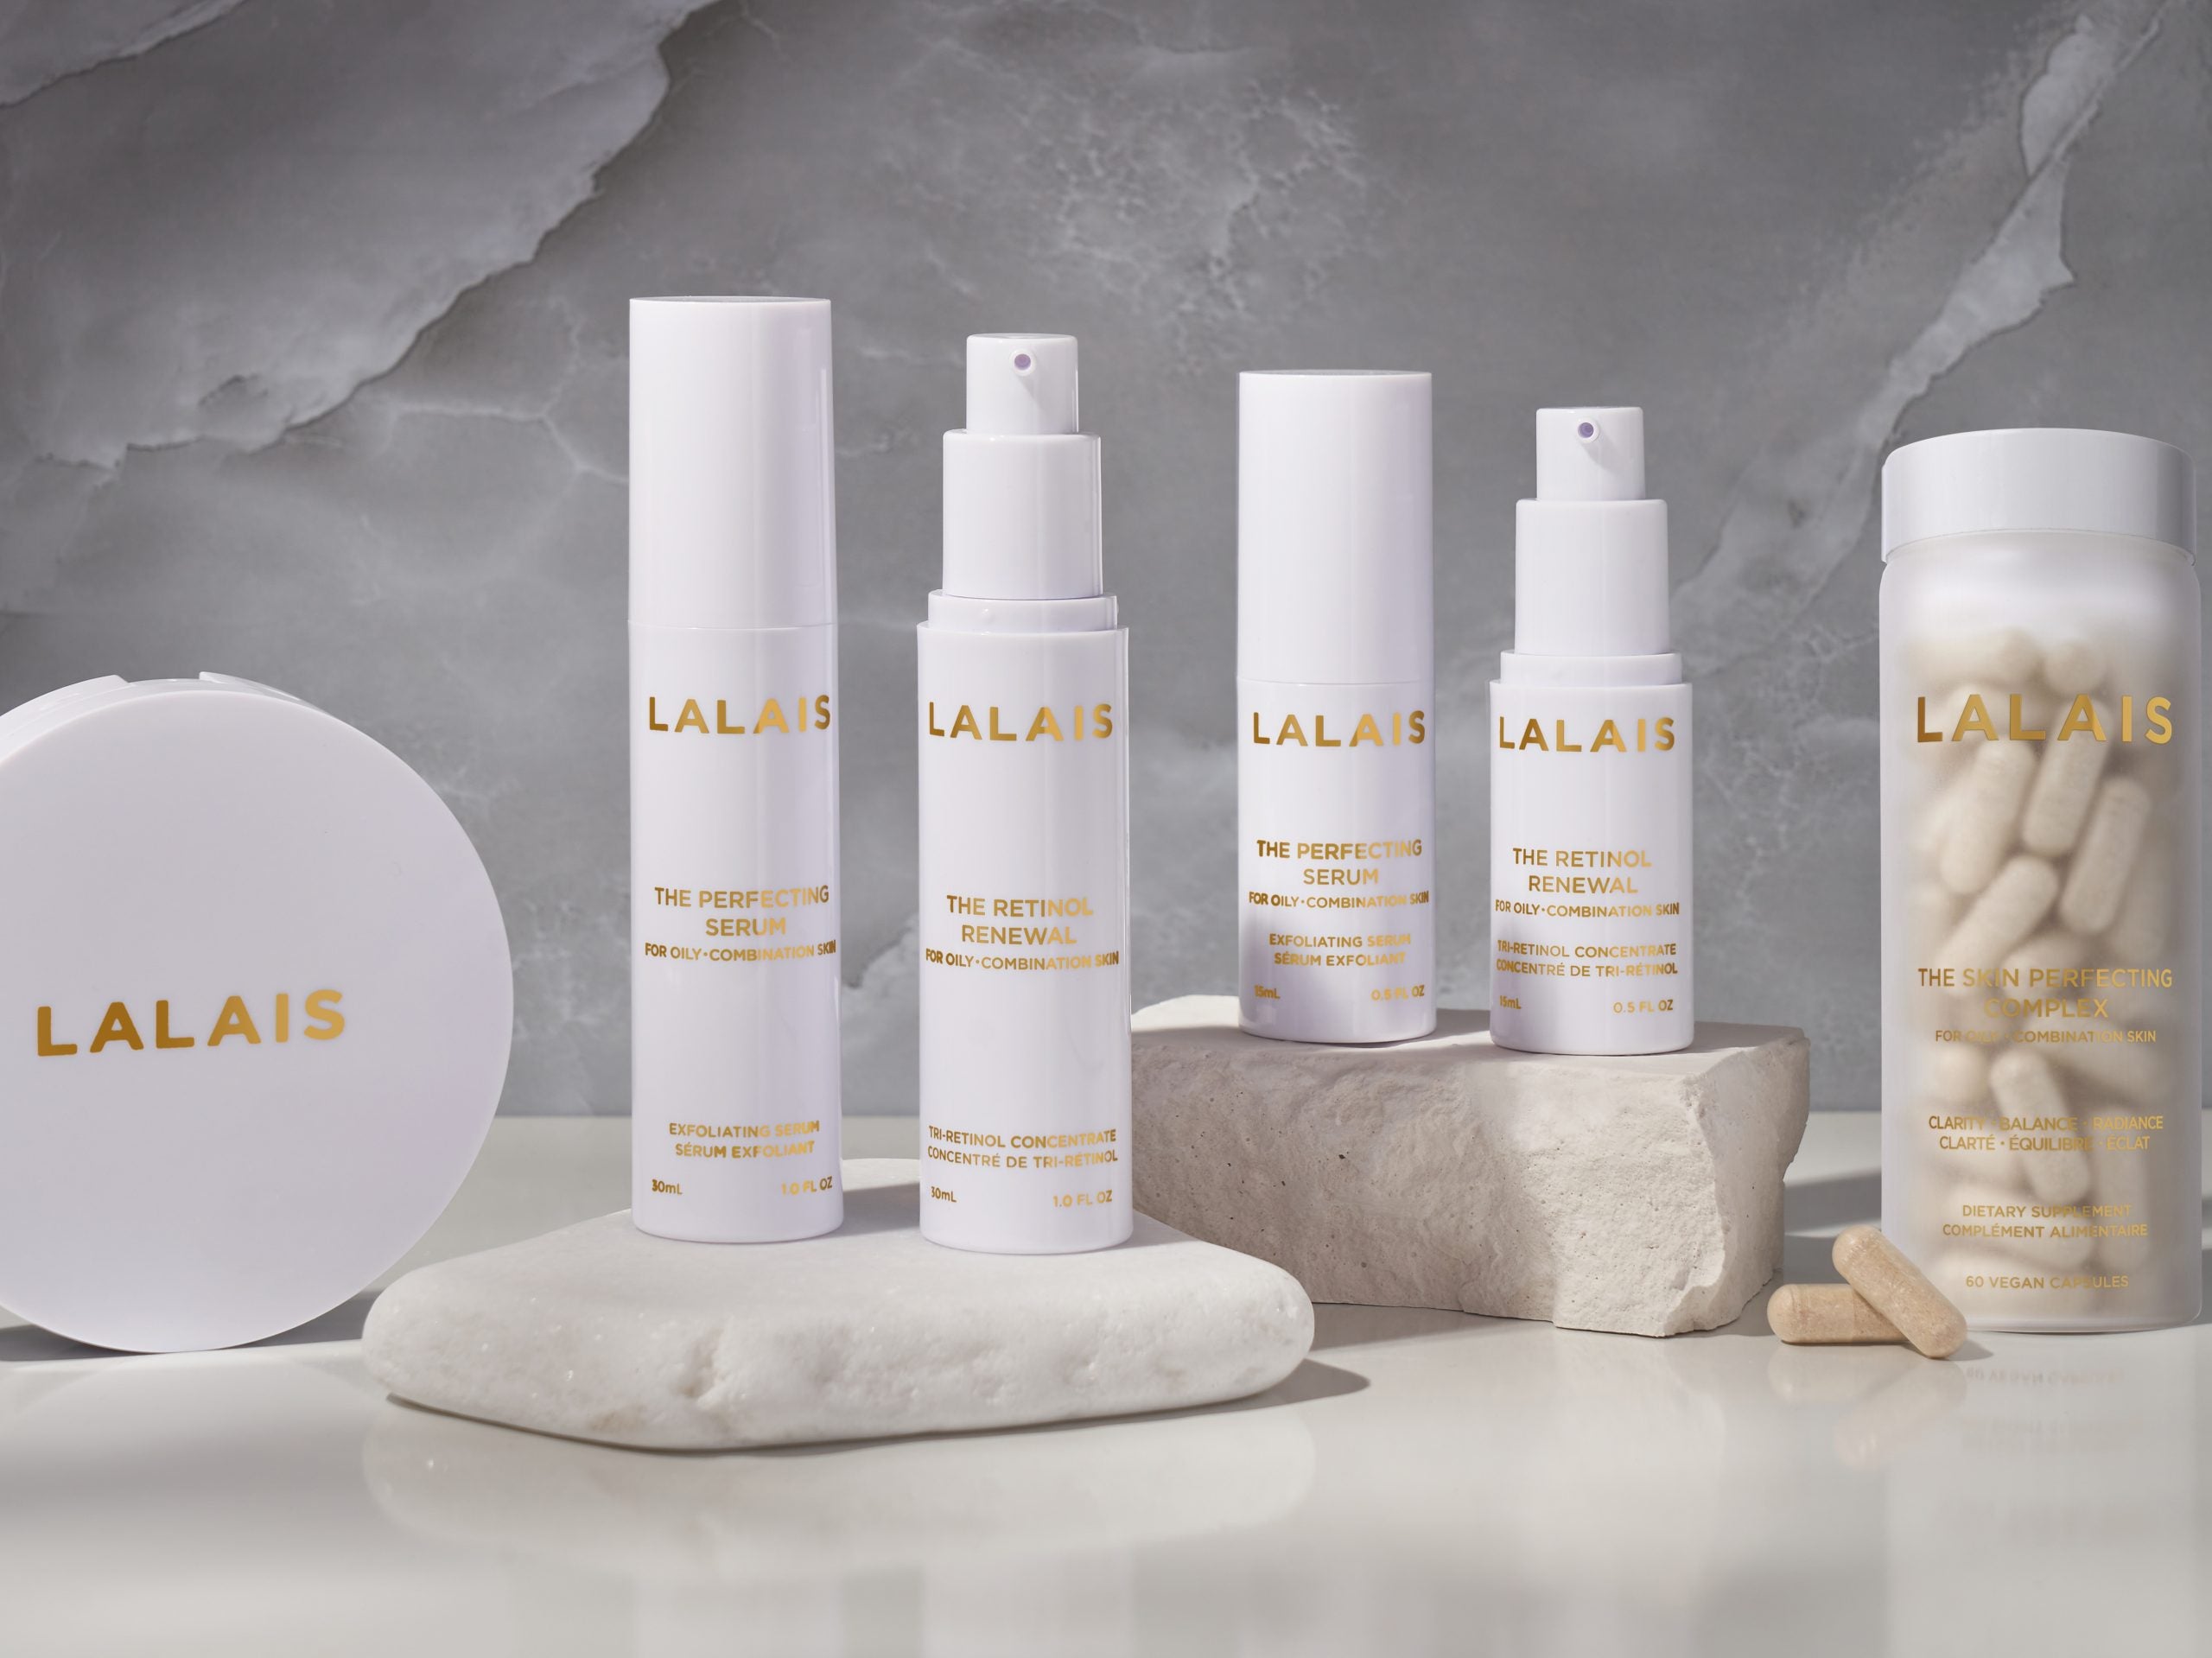 Meet LALAIS: The First Luxury Skincare Brand For Oily Skin Types